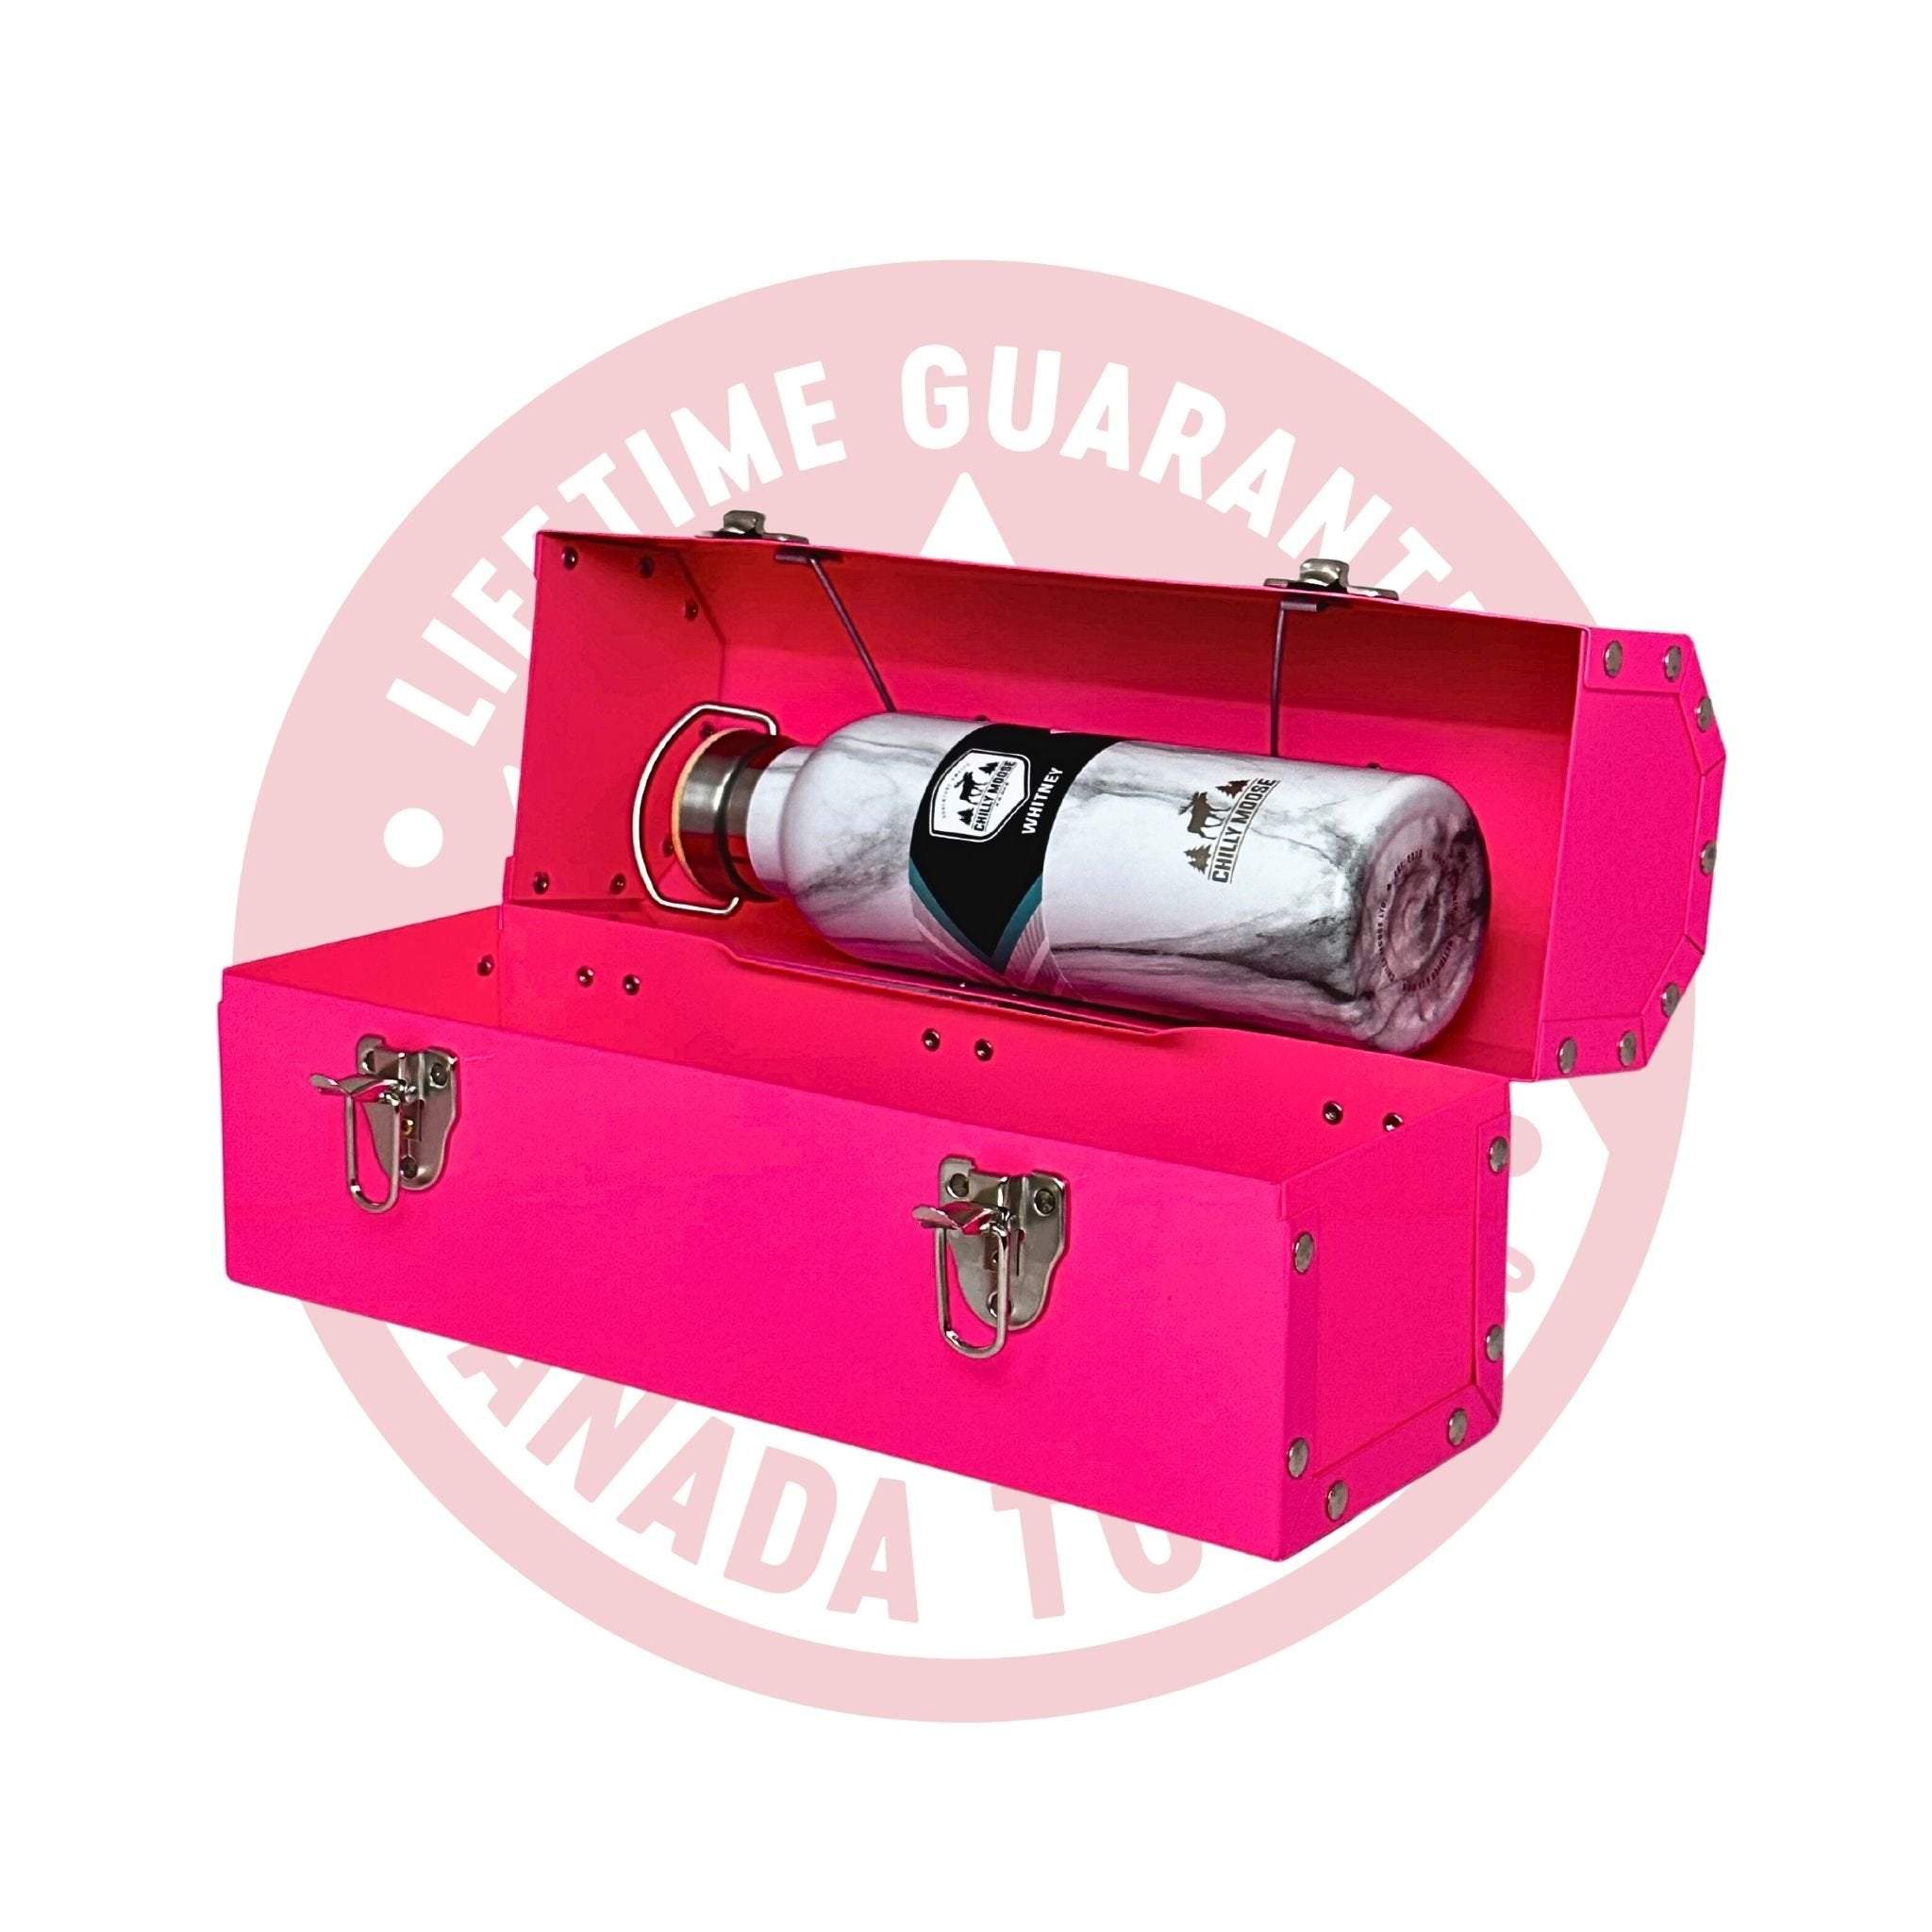 OG'14 Pink + 25oz Whitney Bottle - The Miners LunchboxThe Miners Lunchbox